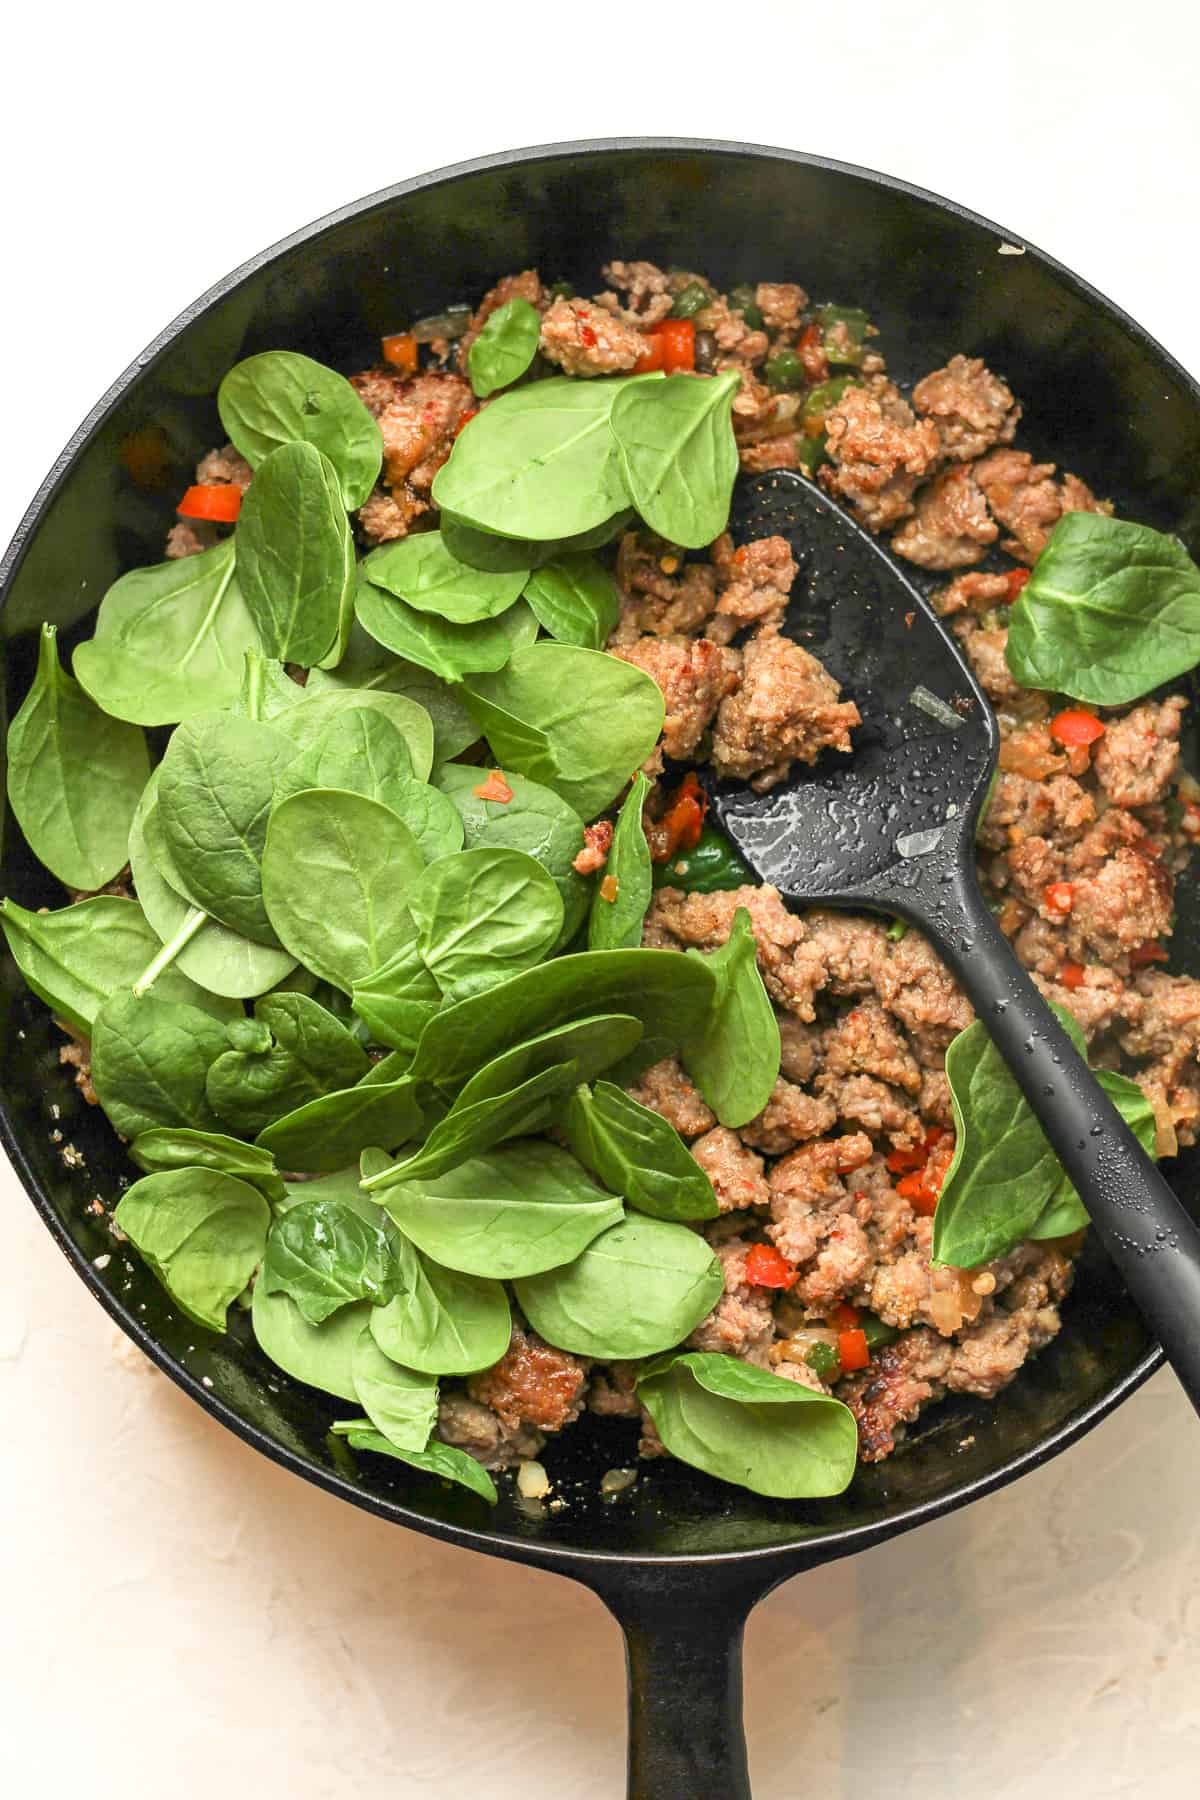 A skillet of the cooked sausage with spinach added on top.